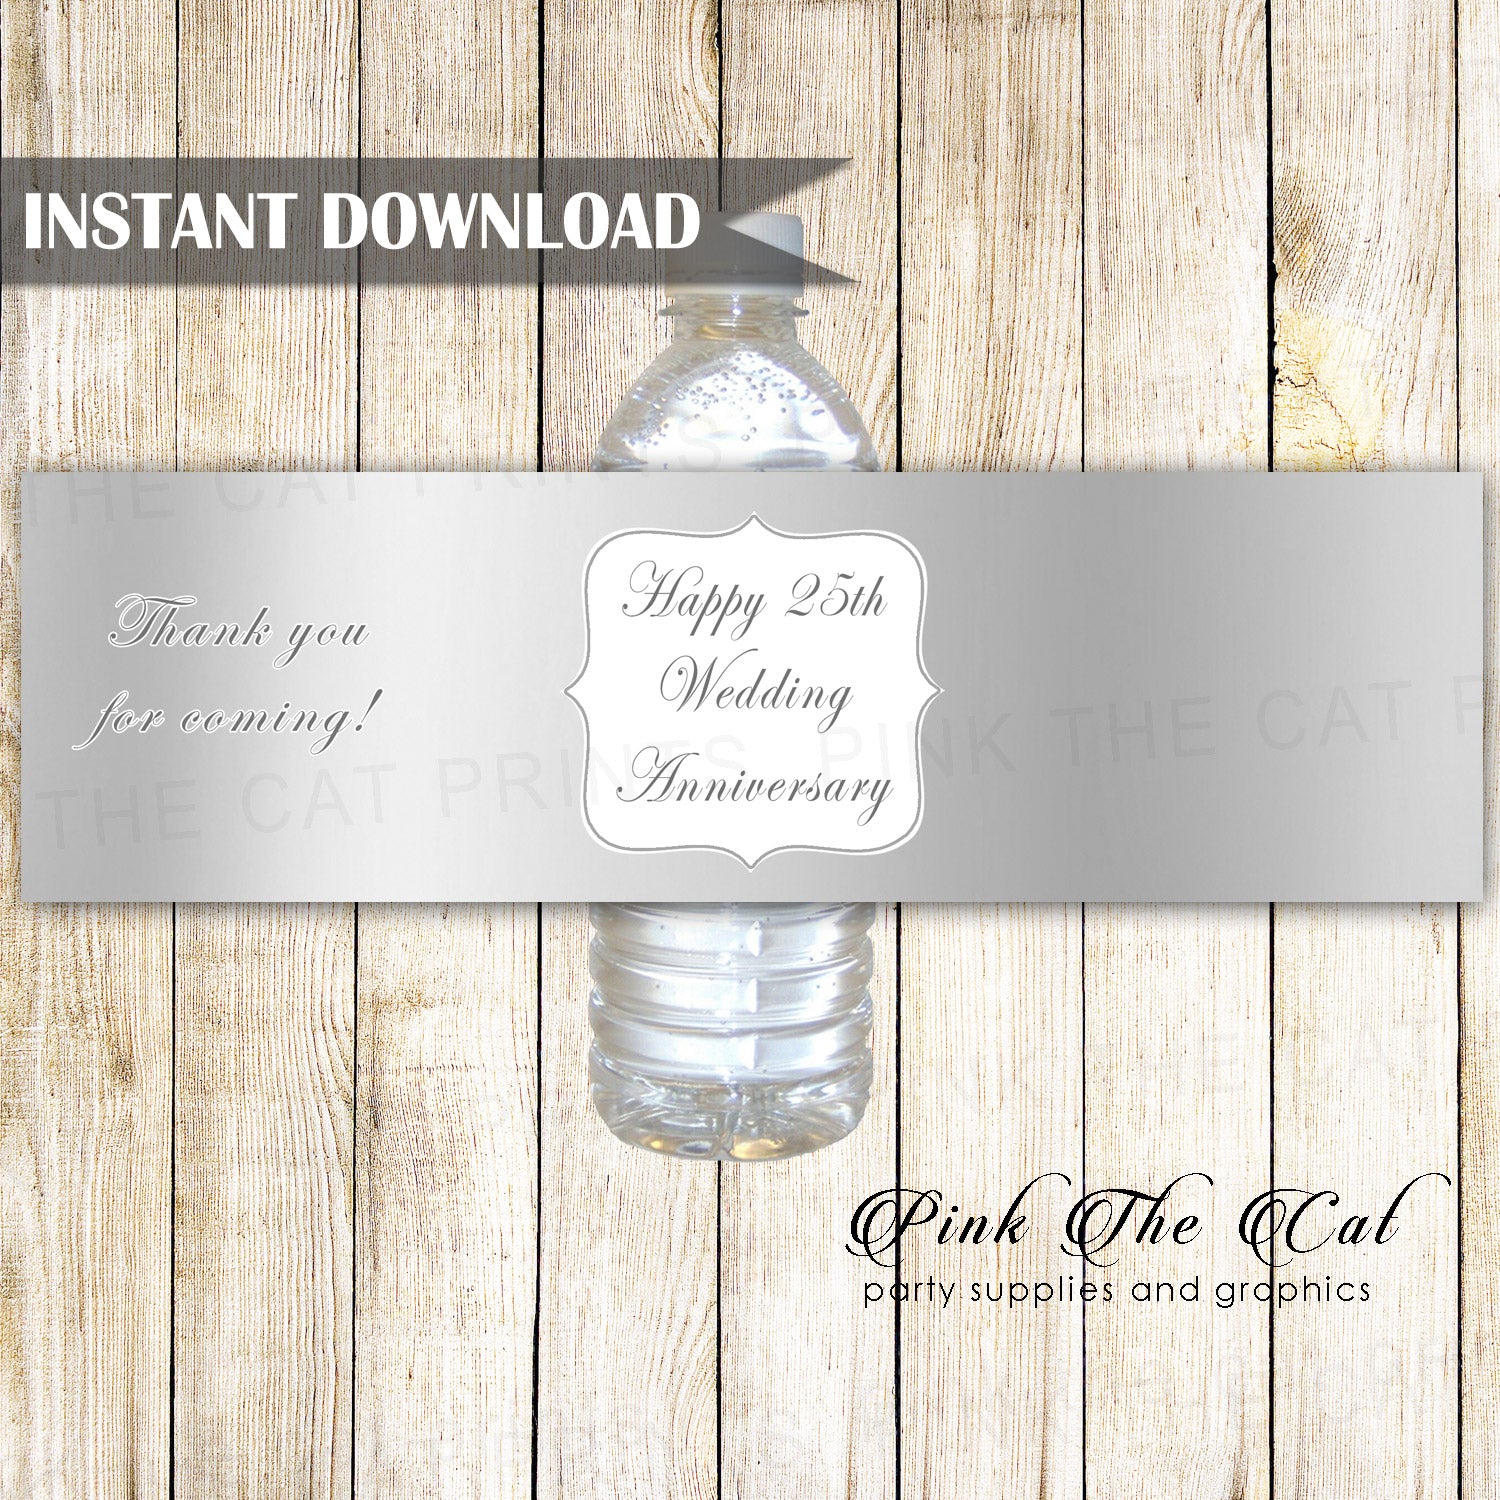 Bottle labels 25th wedding anniversary silver